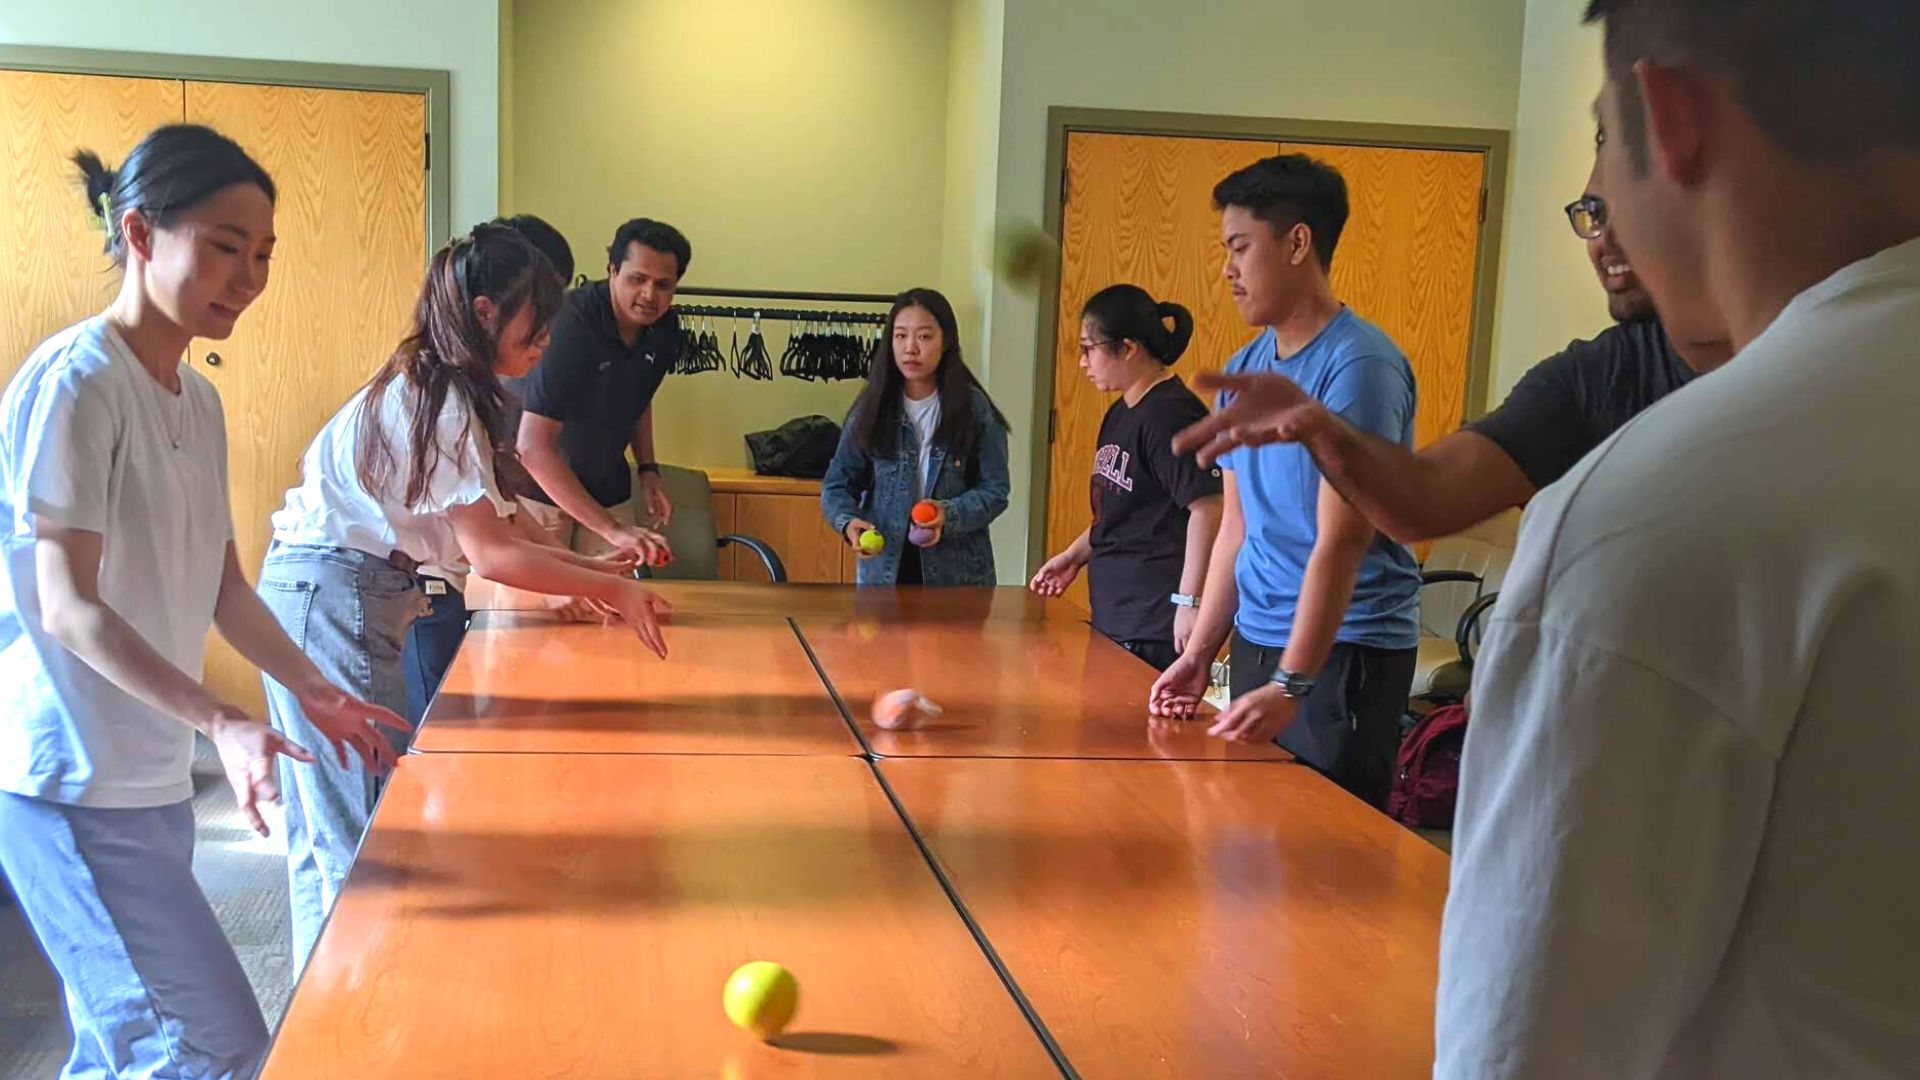 Students gathered around a wooden table passing tennis balls across the table while looking very focused and smiling.